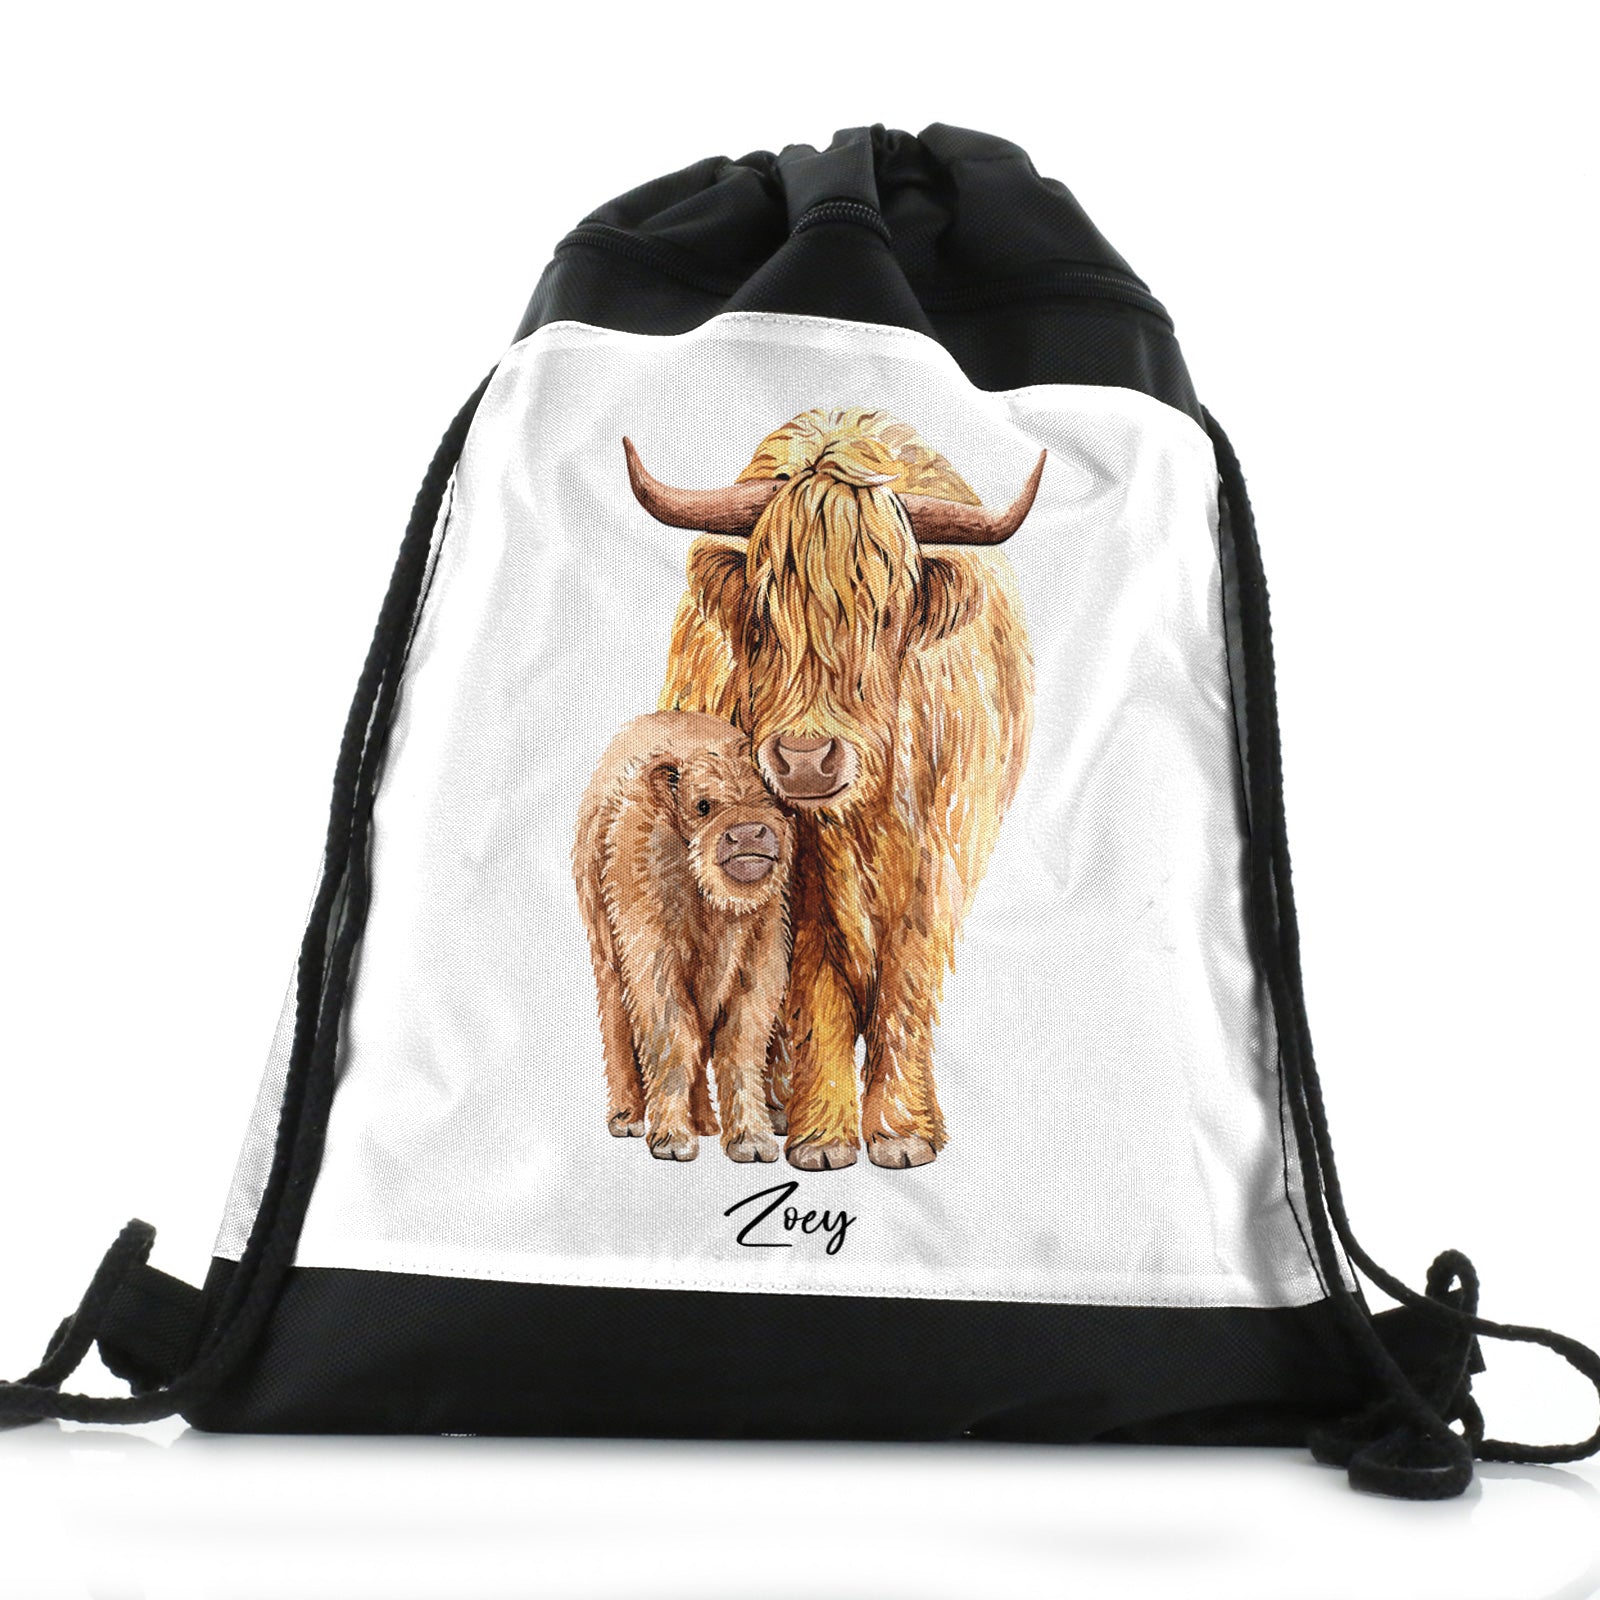 Personalised Drawstring Backpack with Welcoming Text and Relaxing Mum and Baby Highland Cows